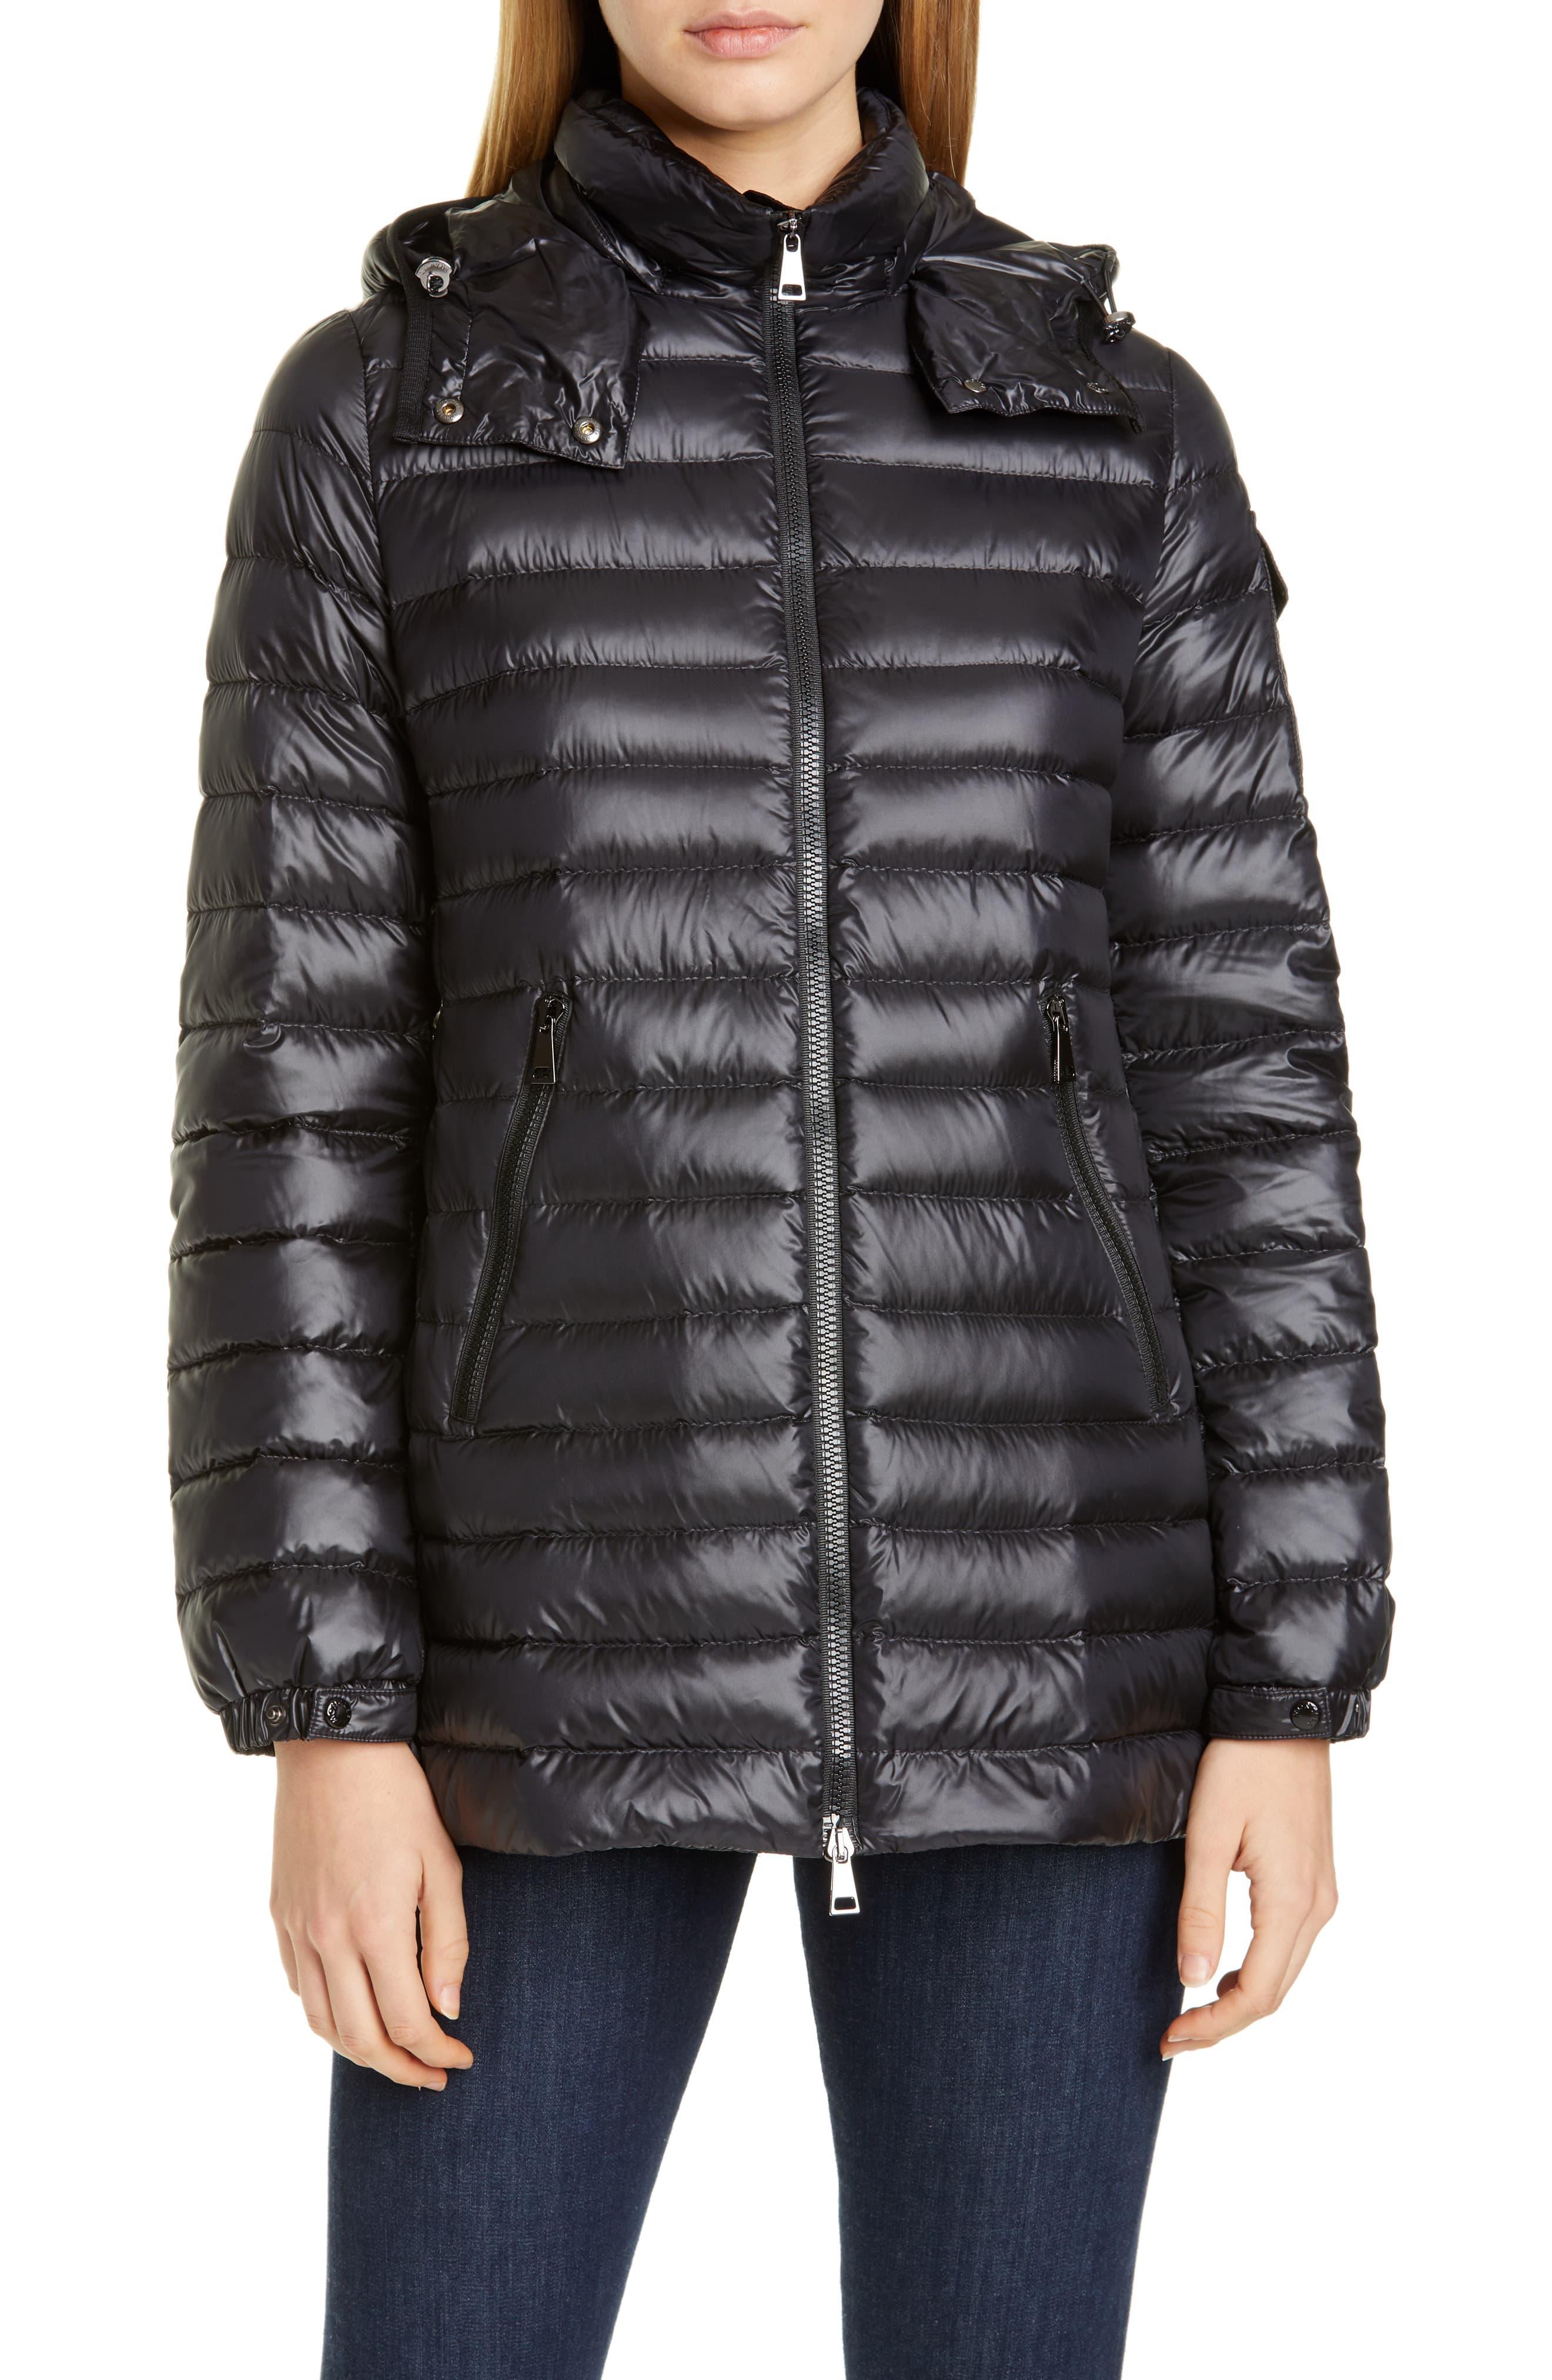 Moncler Menthe Hooded Lightweight Down Puffer Jacket in Black - Lyst